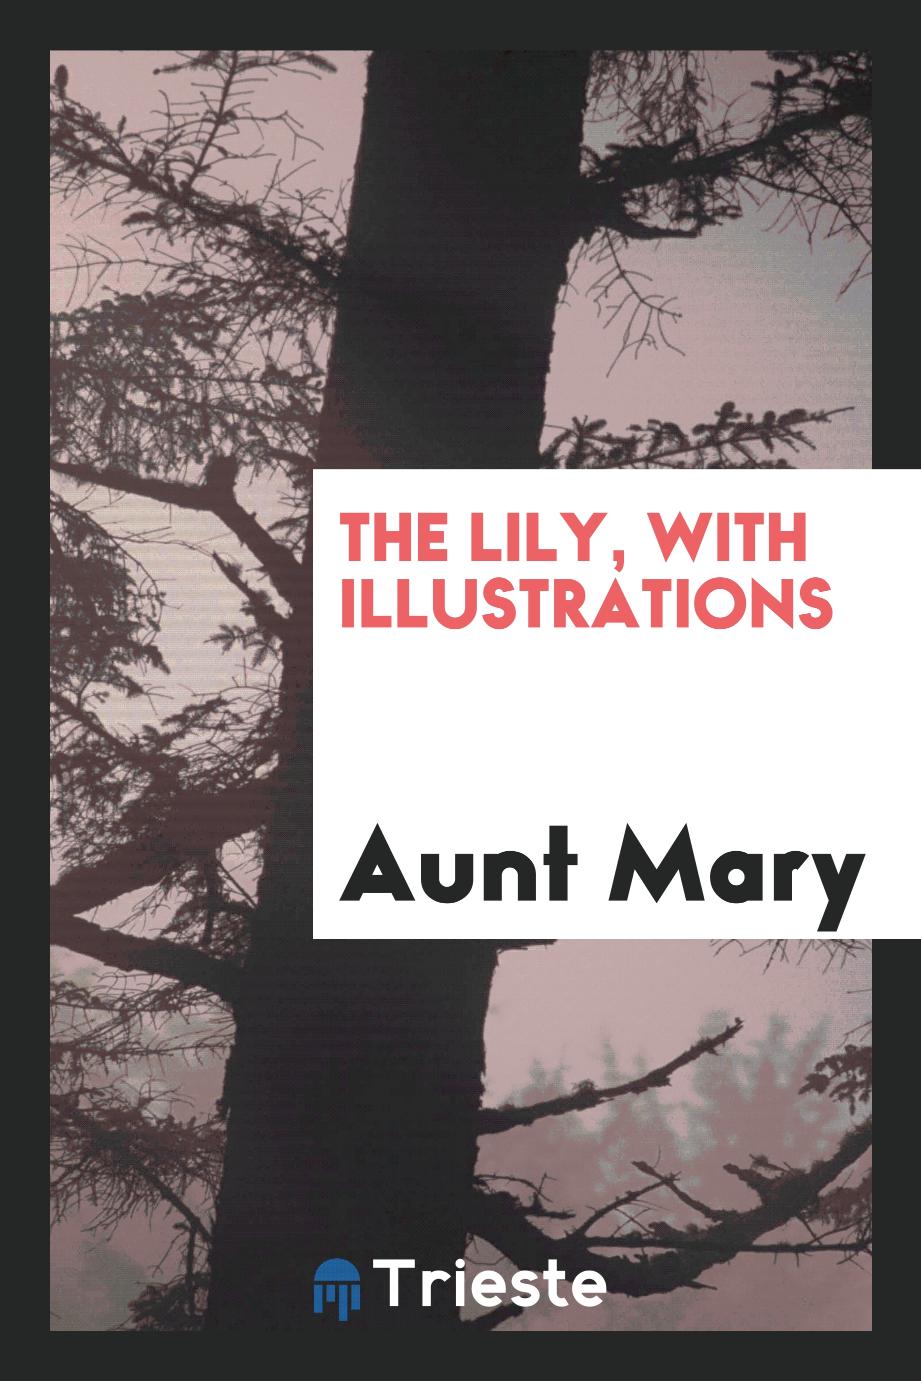 The Lily, with illustrations